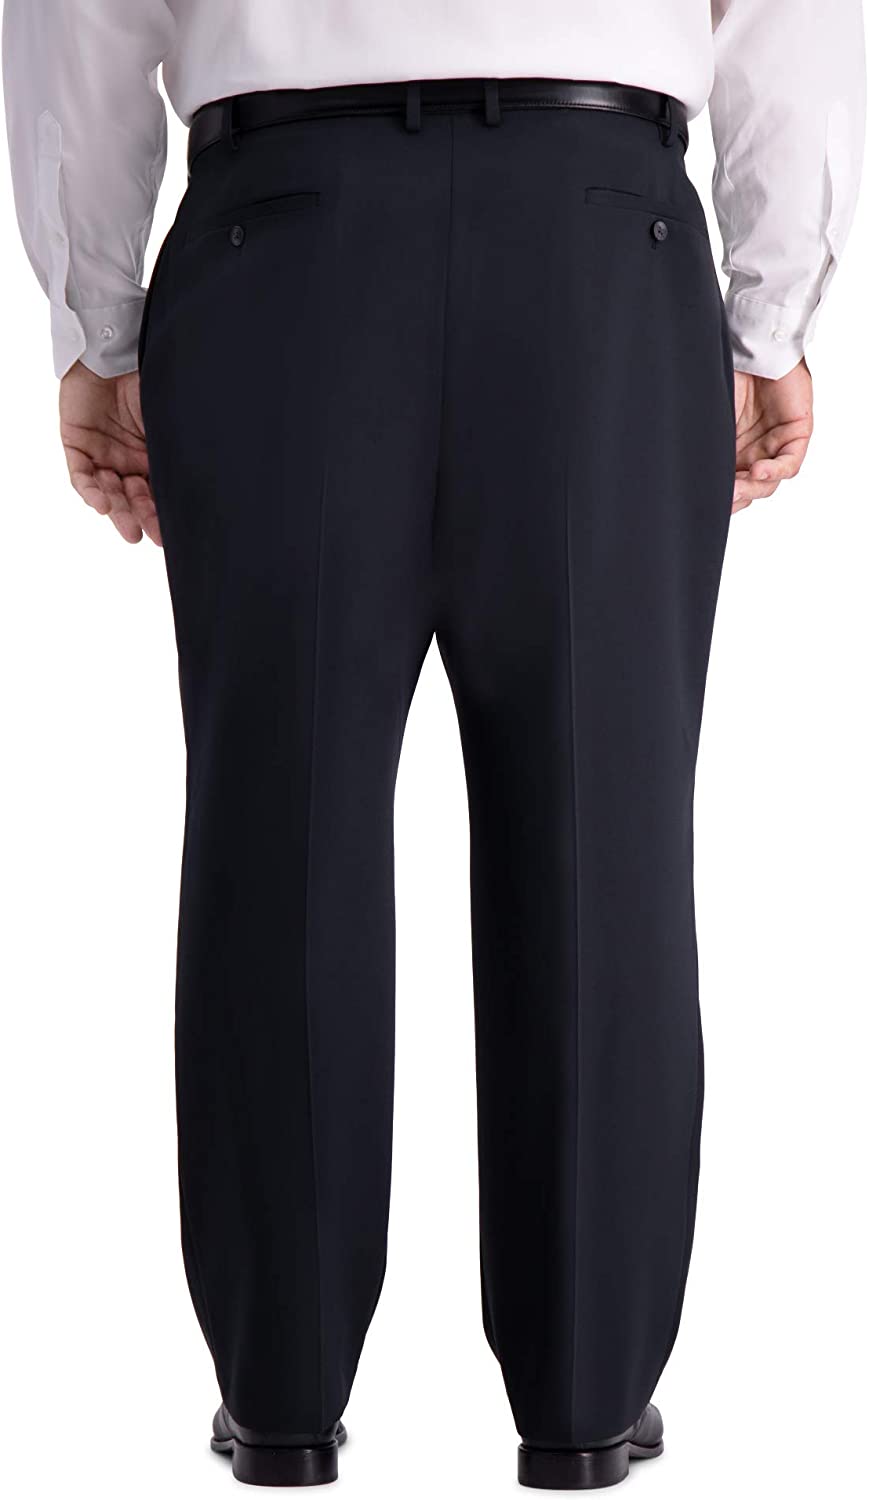 Haggar Men's Big and Tall B&T Active Series Stretch Classic Fit Suit Separate Pant, Black, 46Wx30L - image 3 of 3